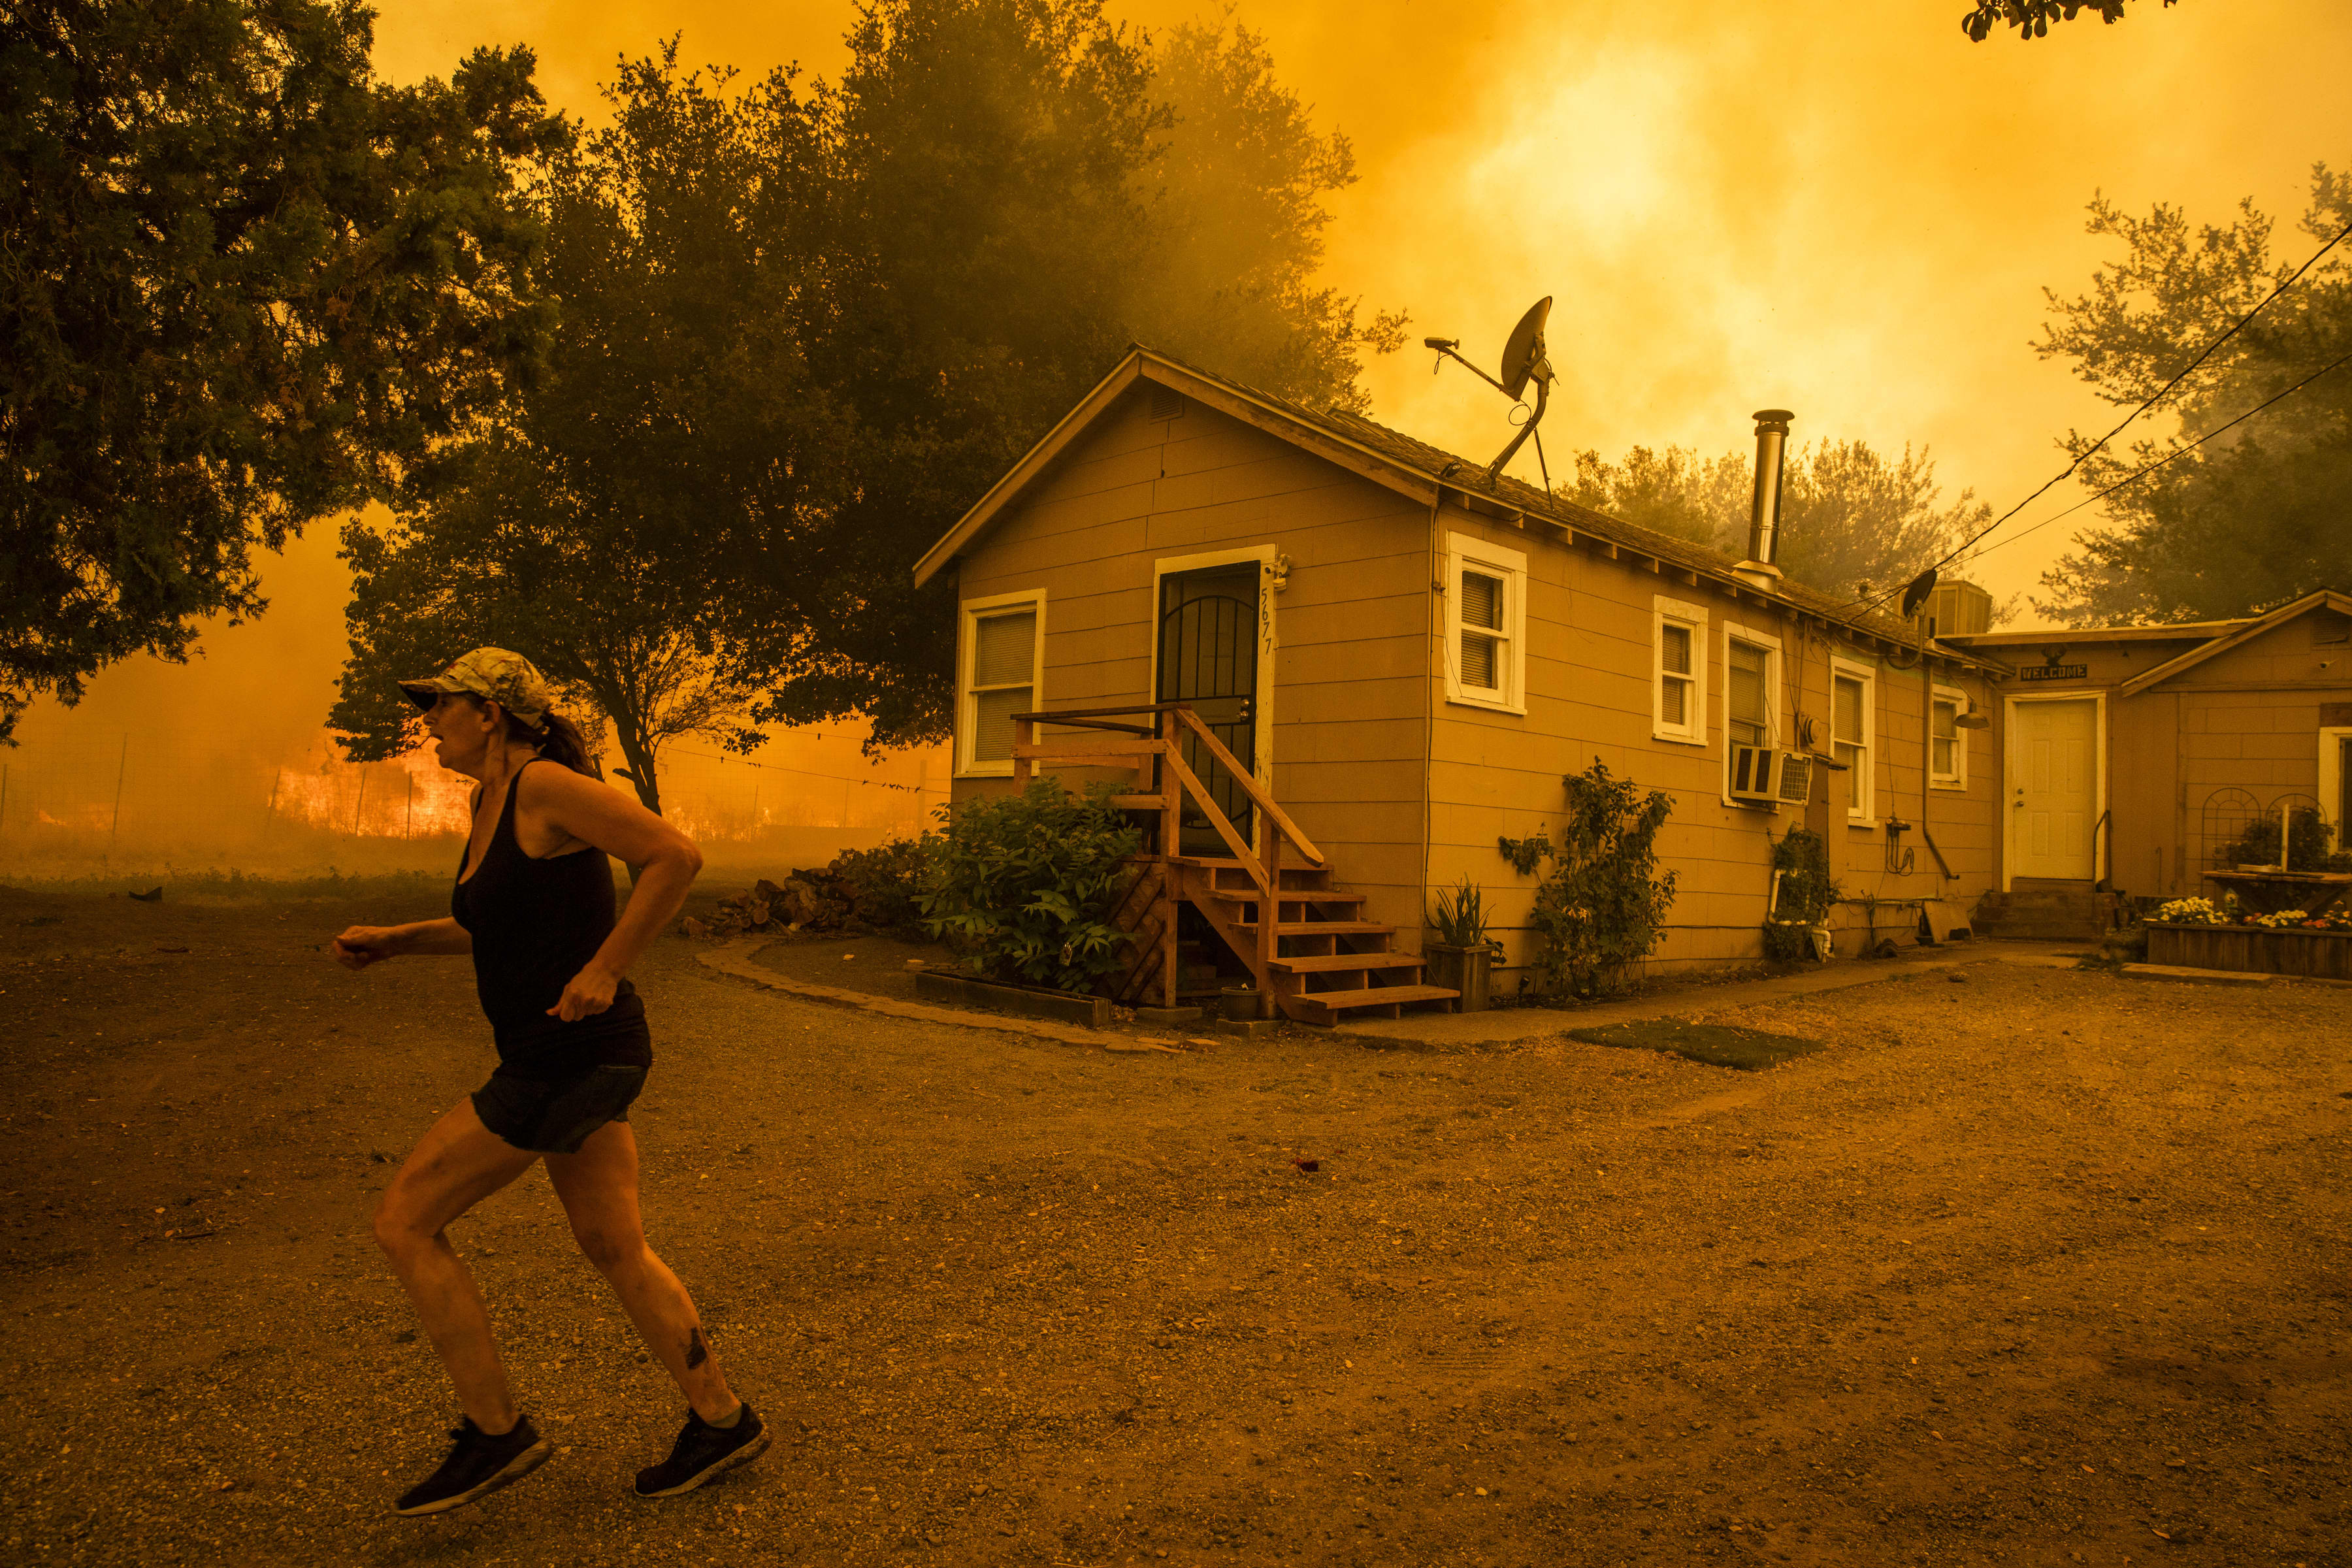 Wildfires rage across California threatening thousands of homes